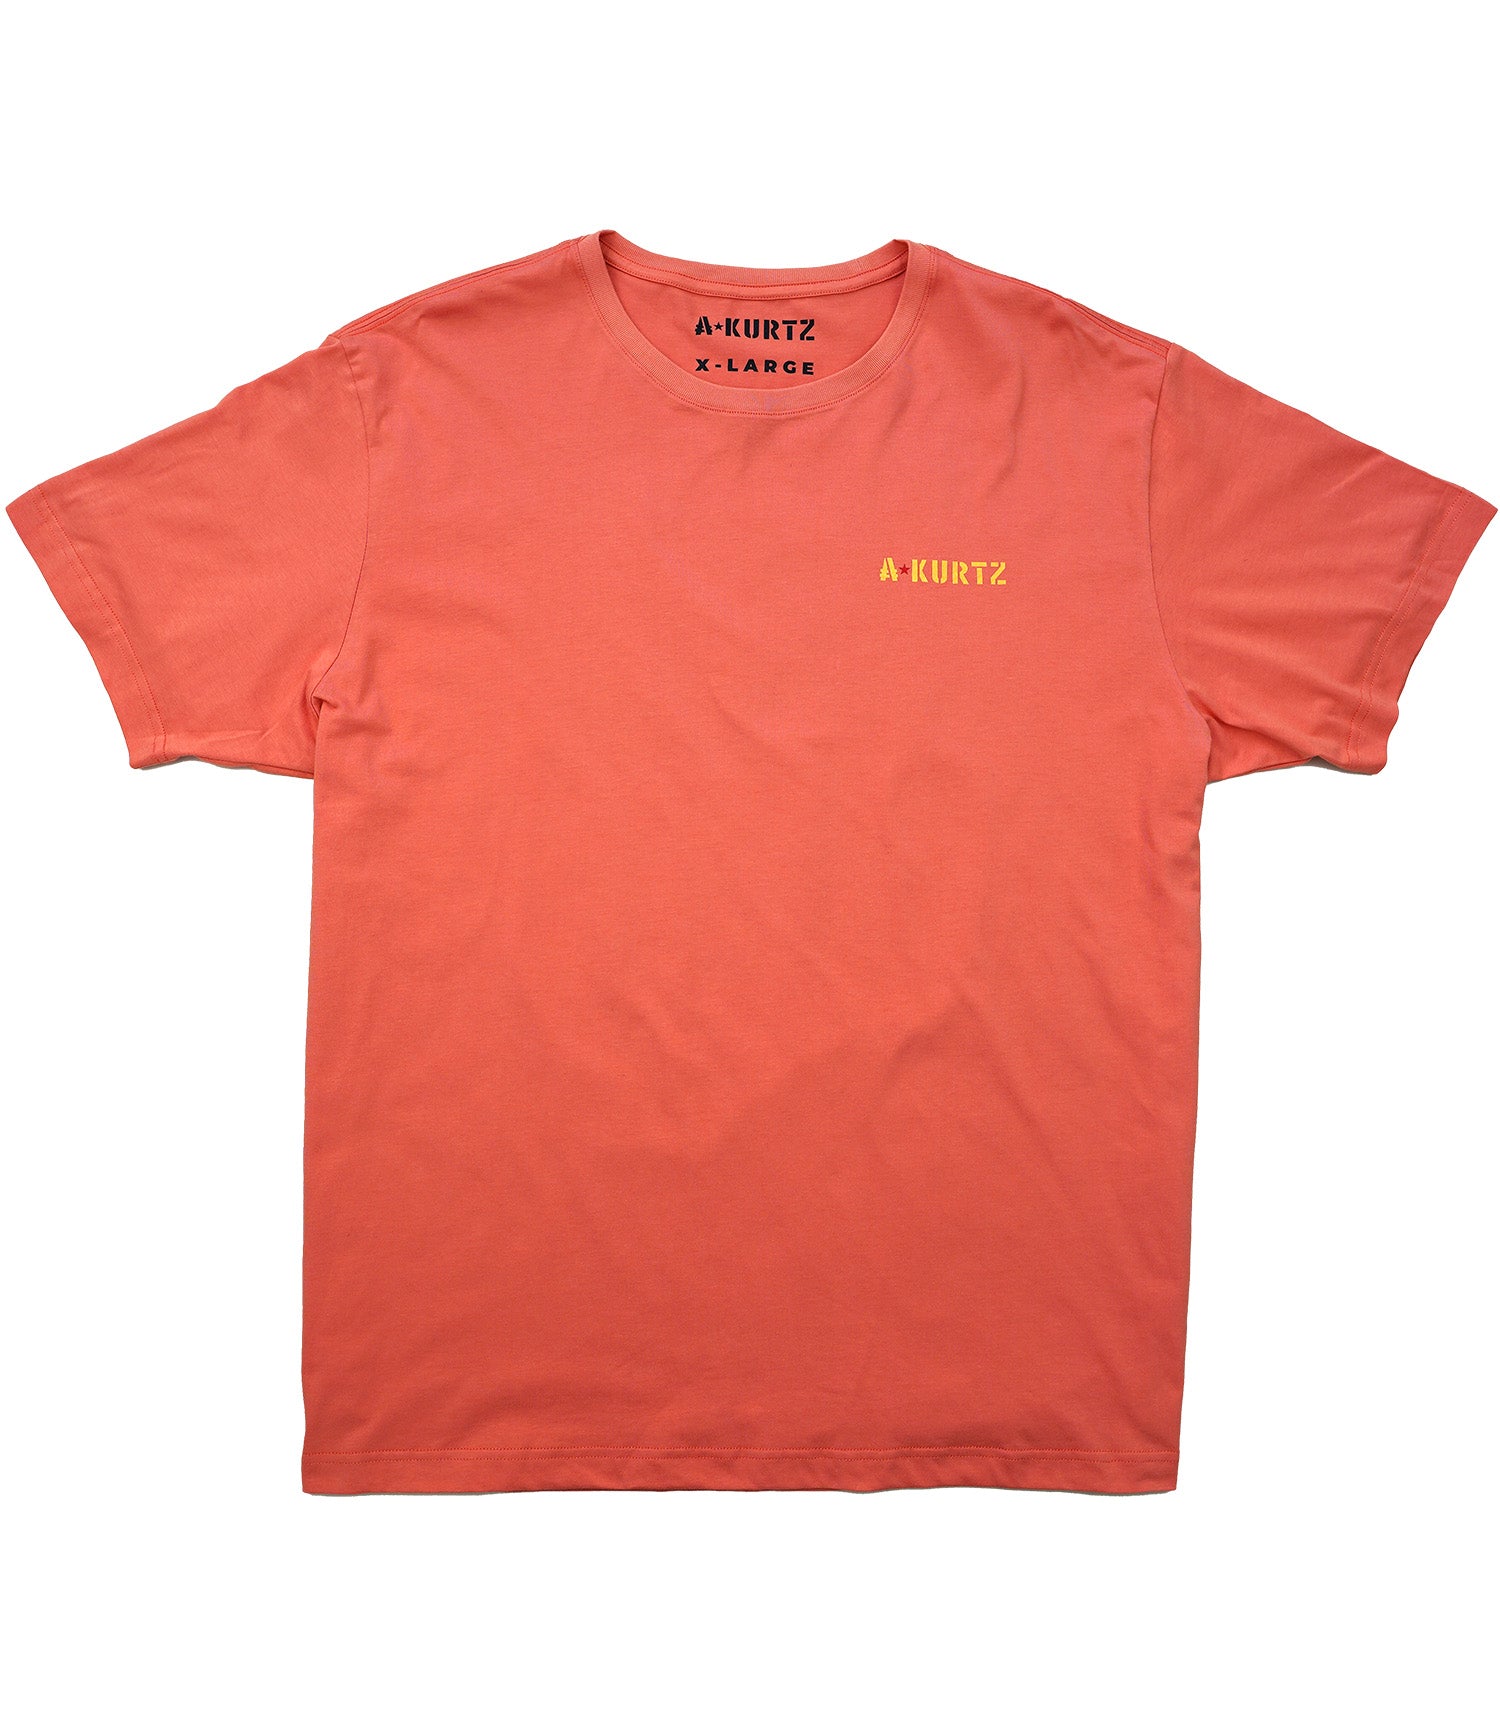 Beach Graphic Tee - Coral - Front